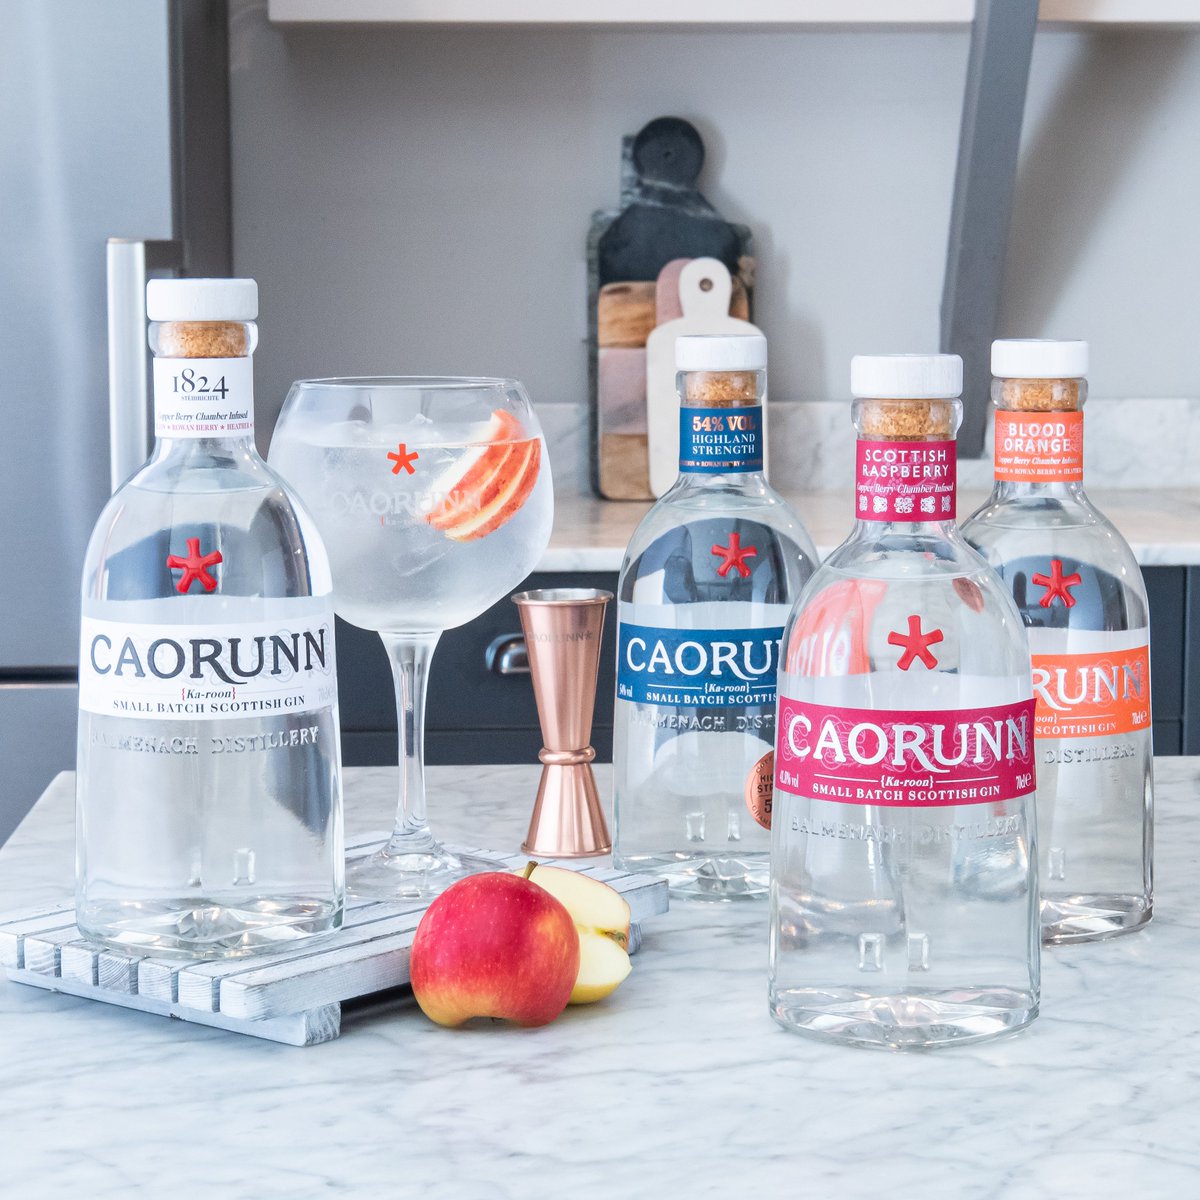 6 traditional gin botanicals, 5 unique Celtic botanicals, 4 of your Caorunn favourites. The question is: Who are you inviting to the table? 🥂 It doesn't take a Gin Genius to drink responsibly. #GinGenius #Caorunn #SmallBatchGin #GandT